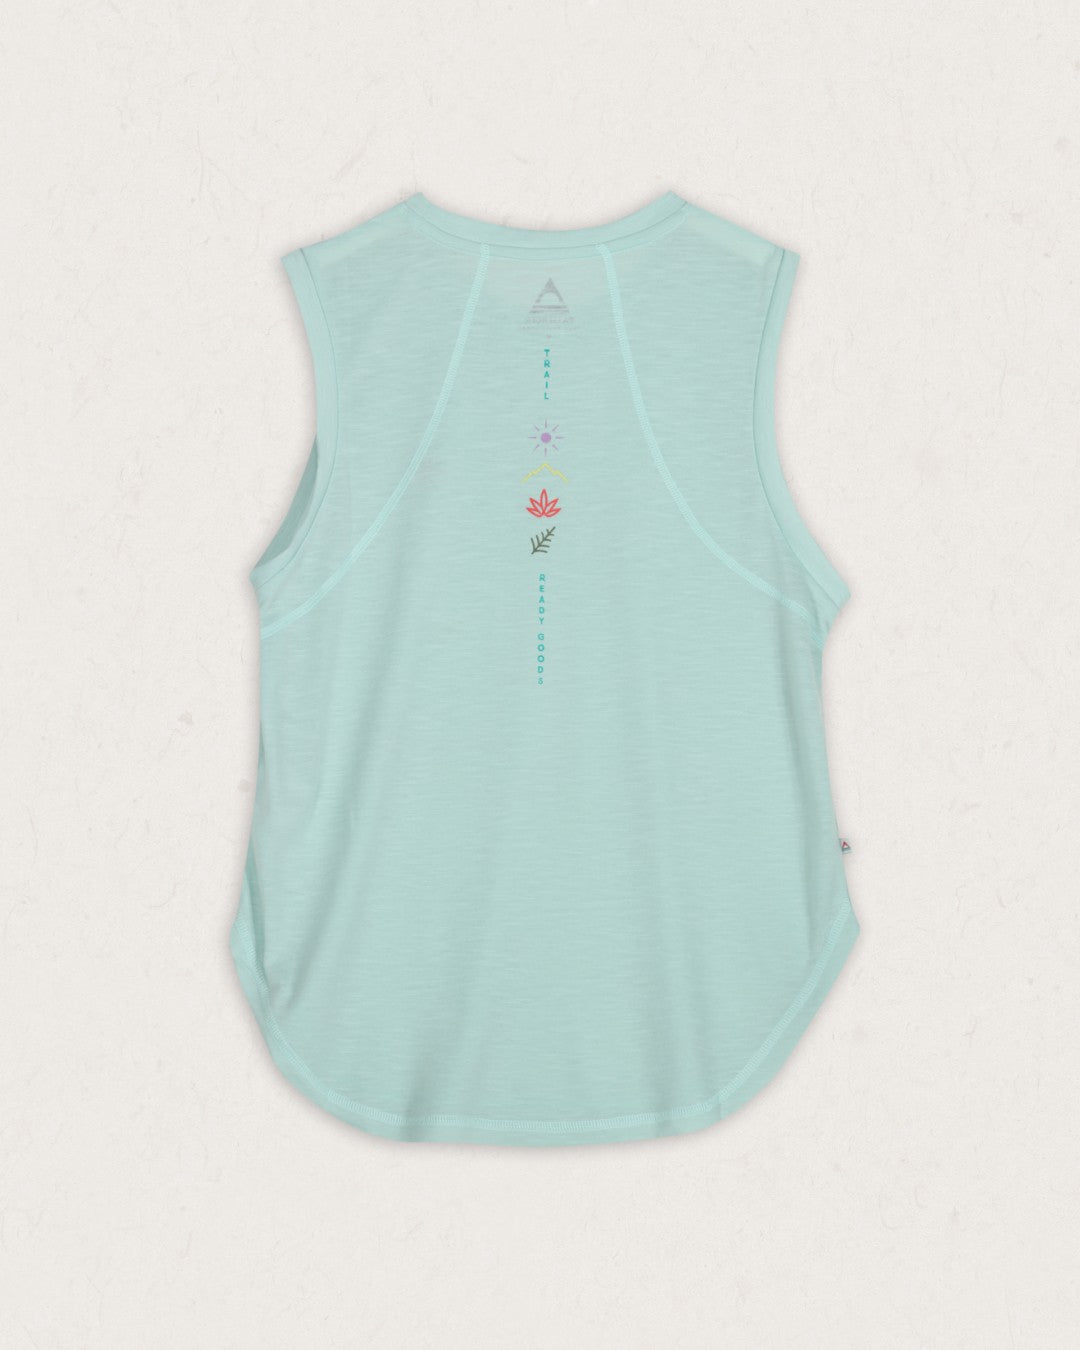 Blue Bird Recycled Active Vest - Mint Green